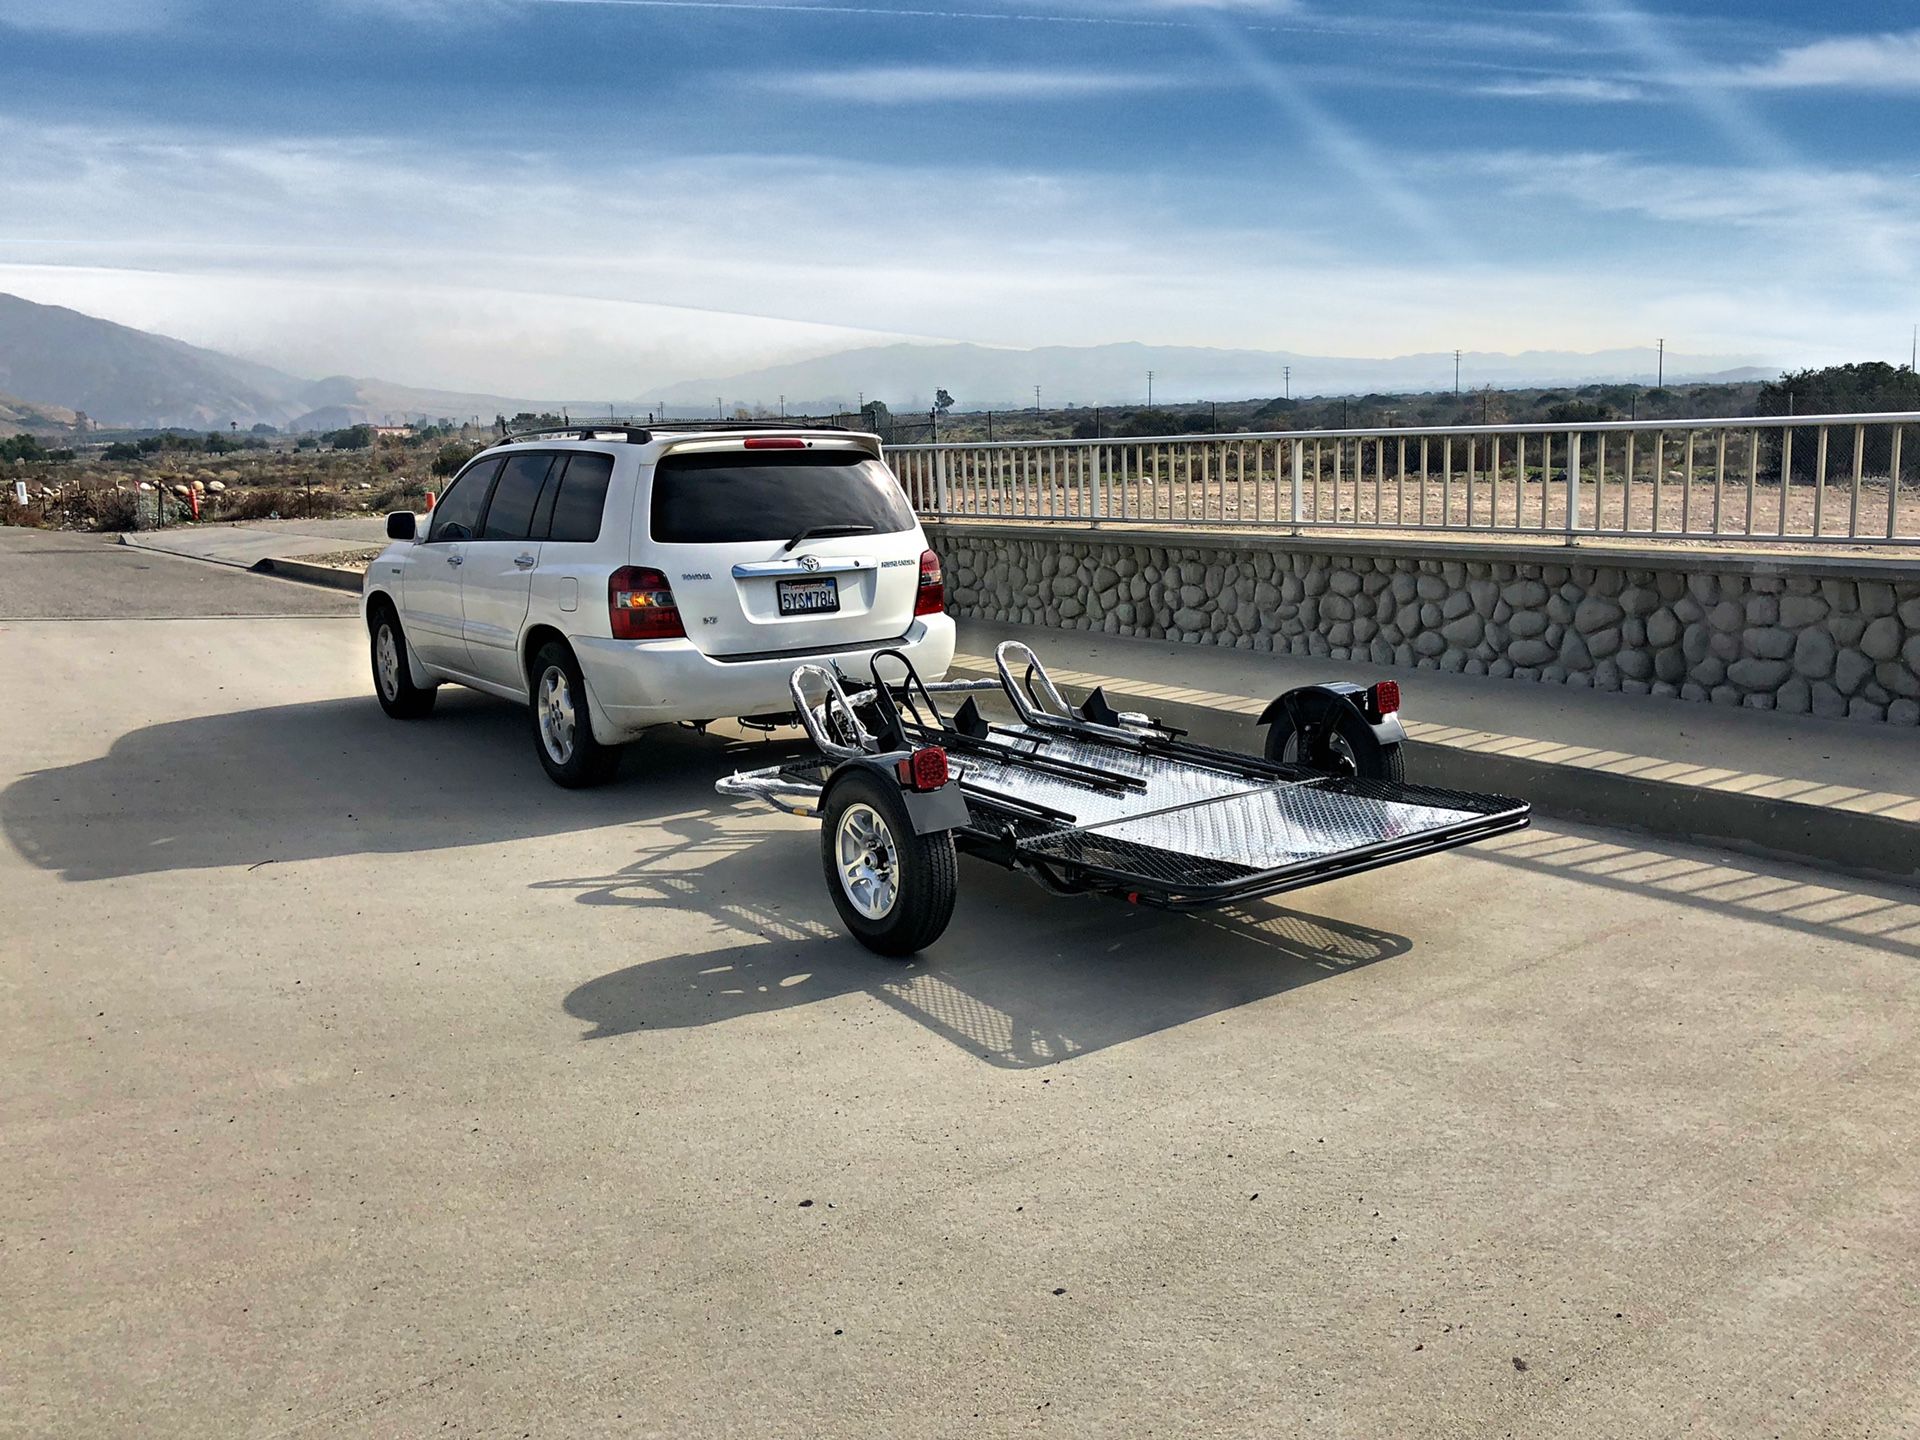 Motorcycle trailer tows 3 motorcycles rated for 2000lb folds for storage